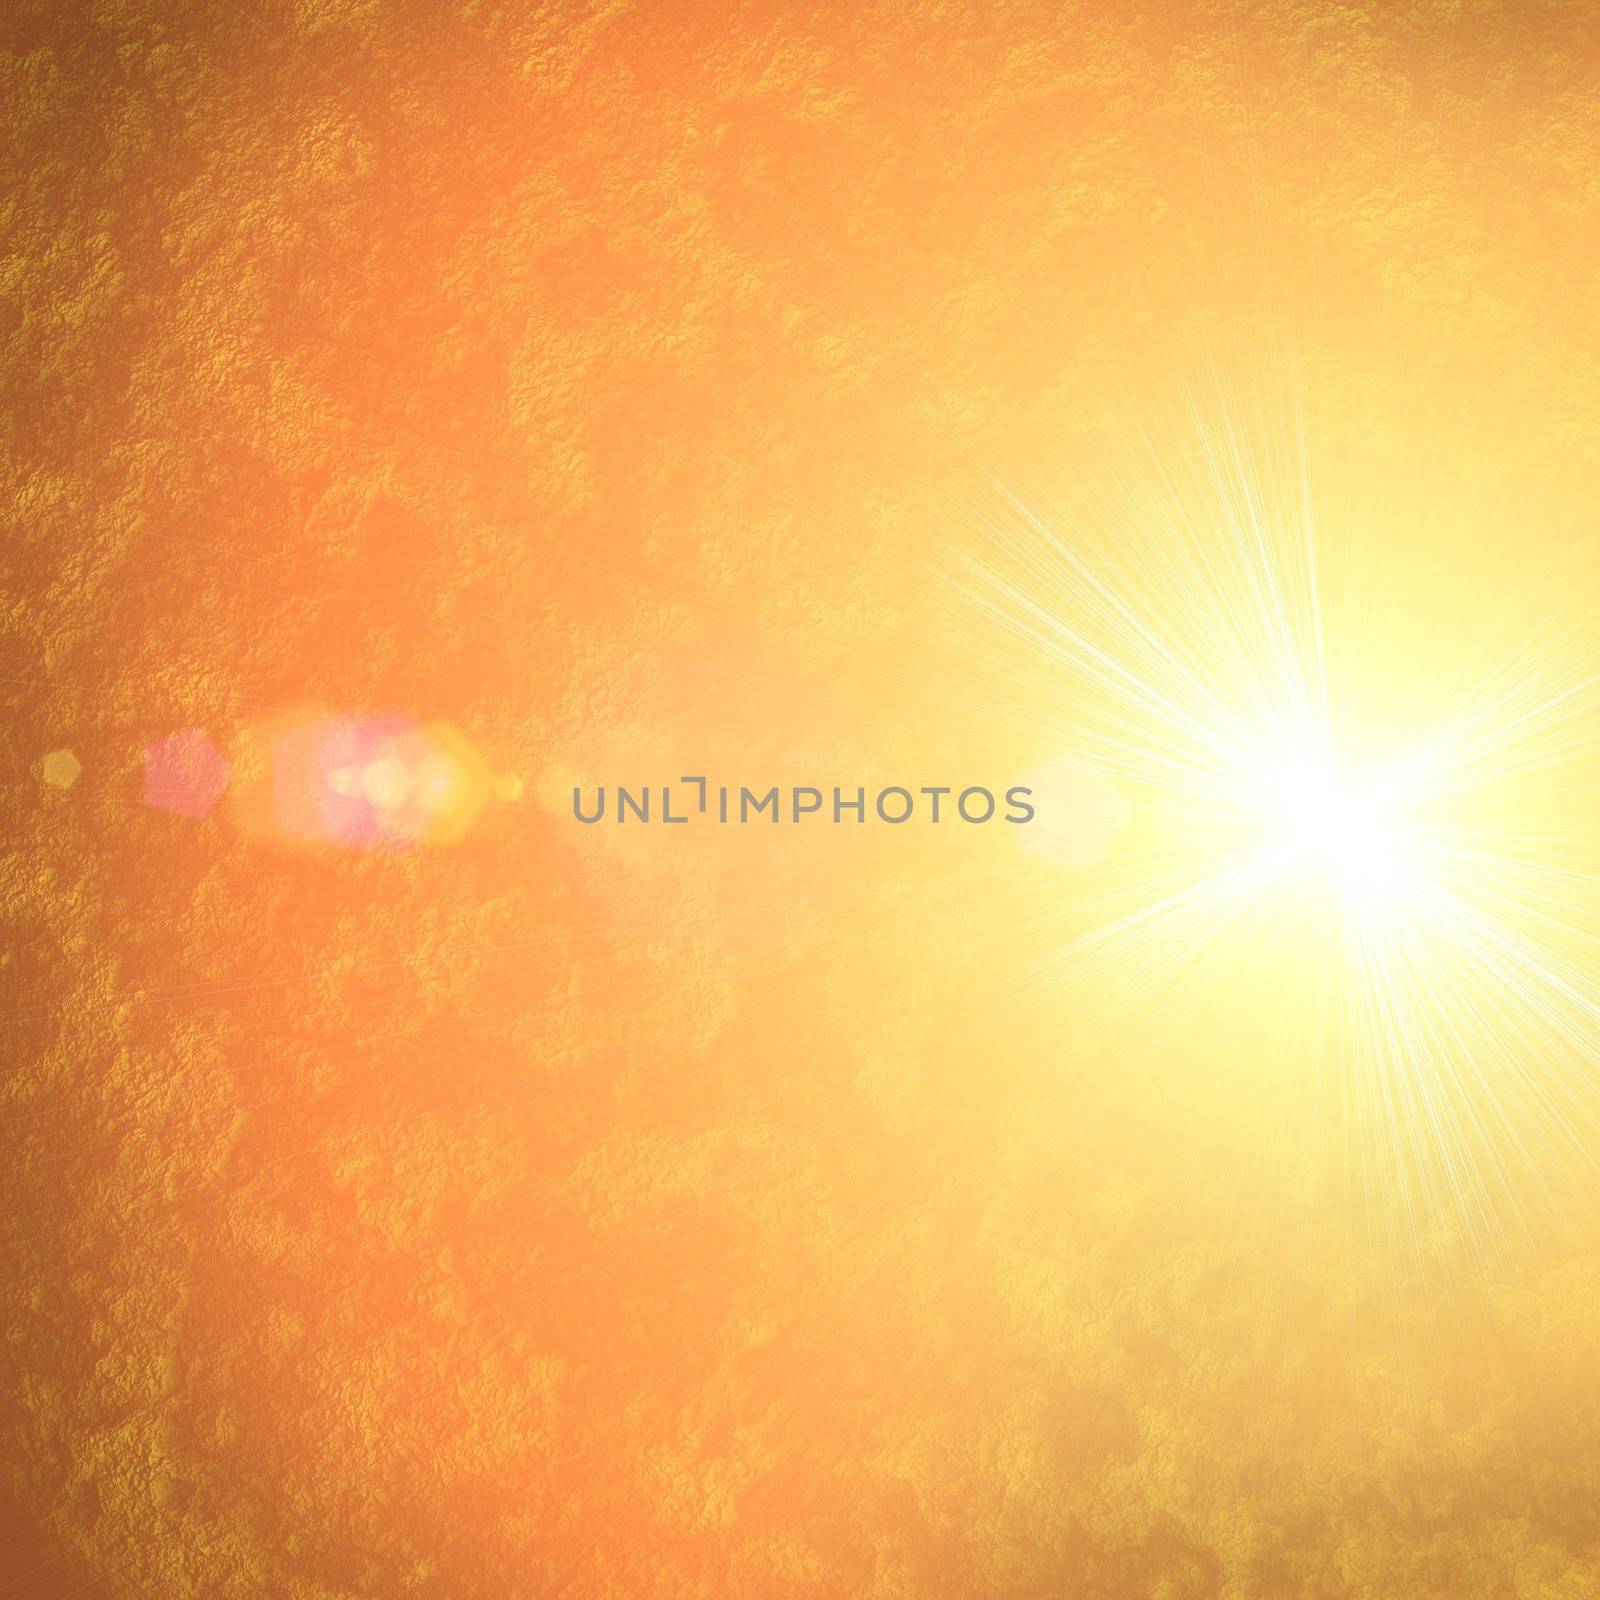 A fiery solar scape background.